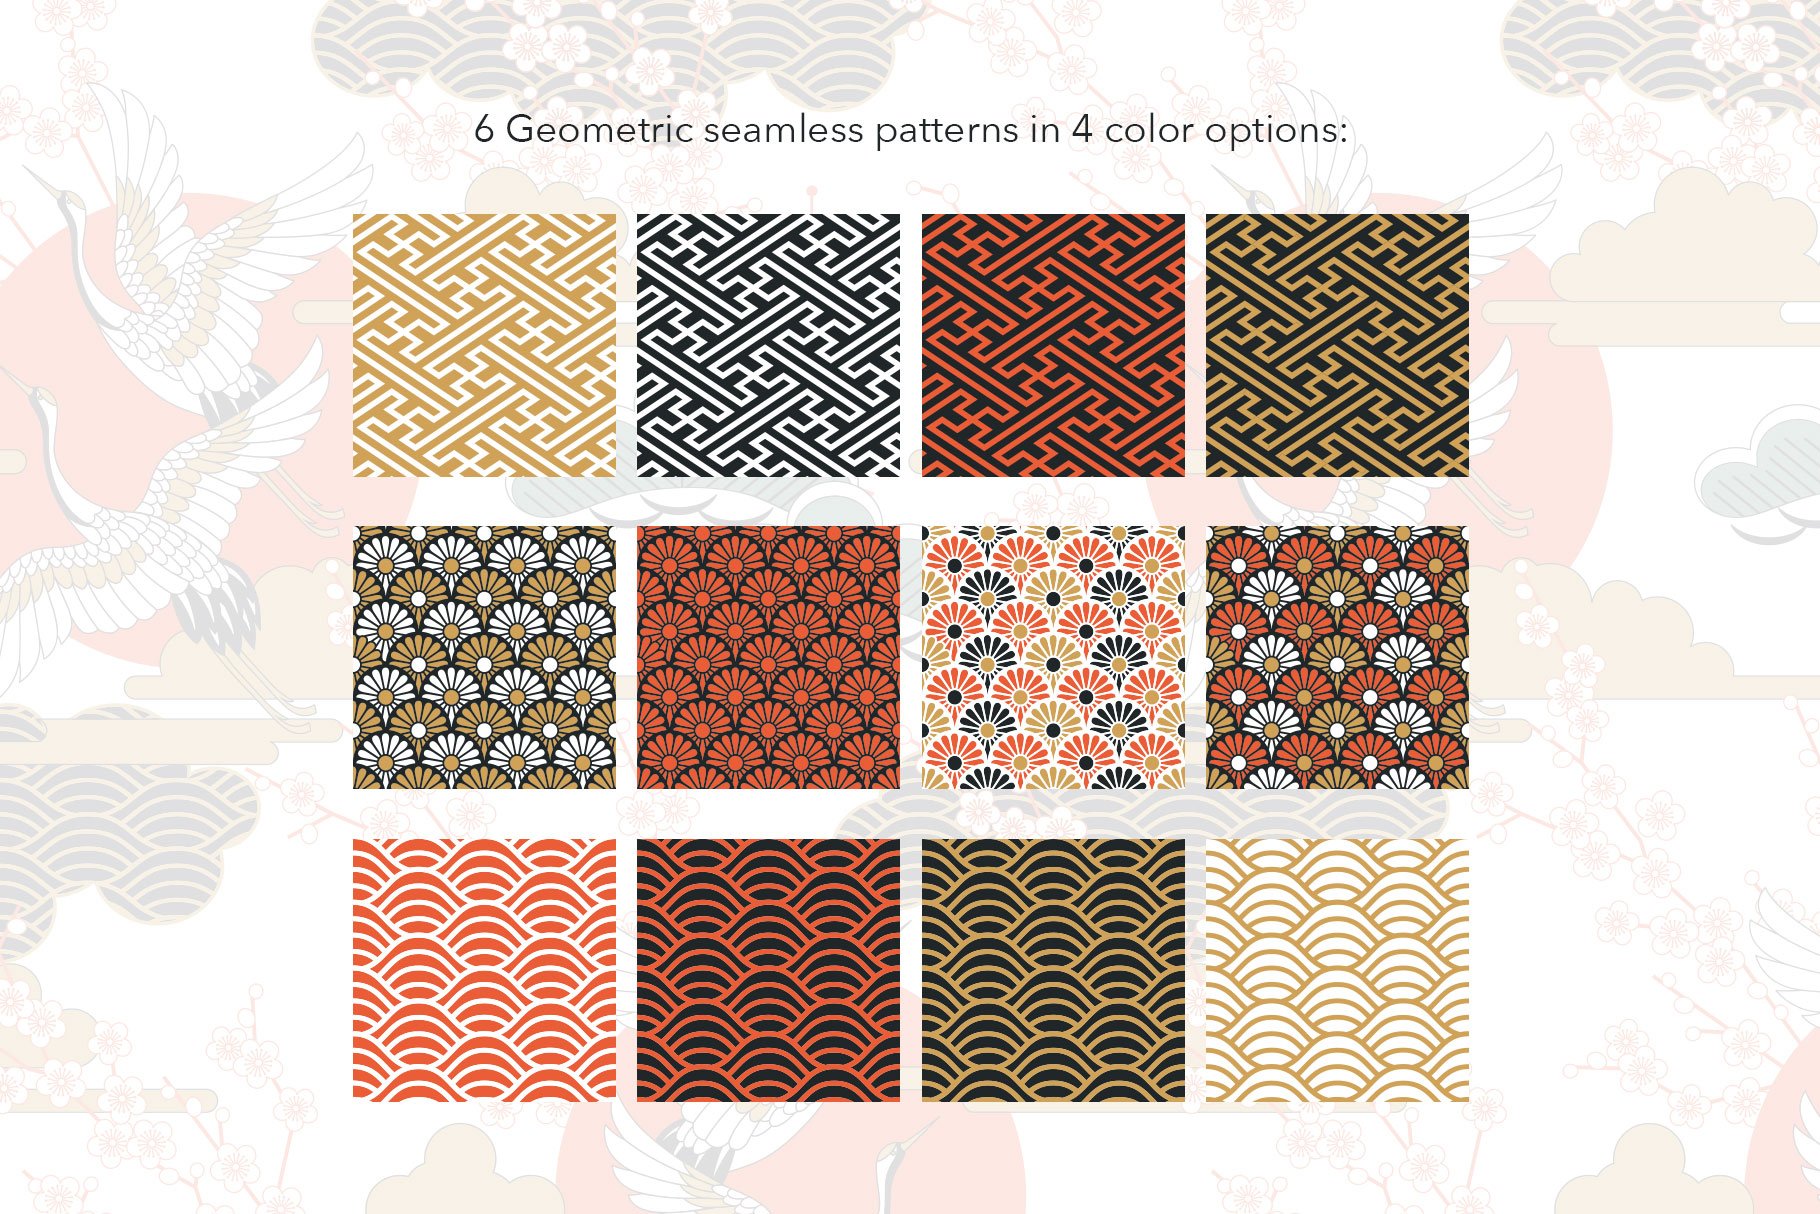 Some cool Japanese patterns.